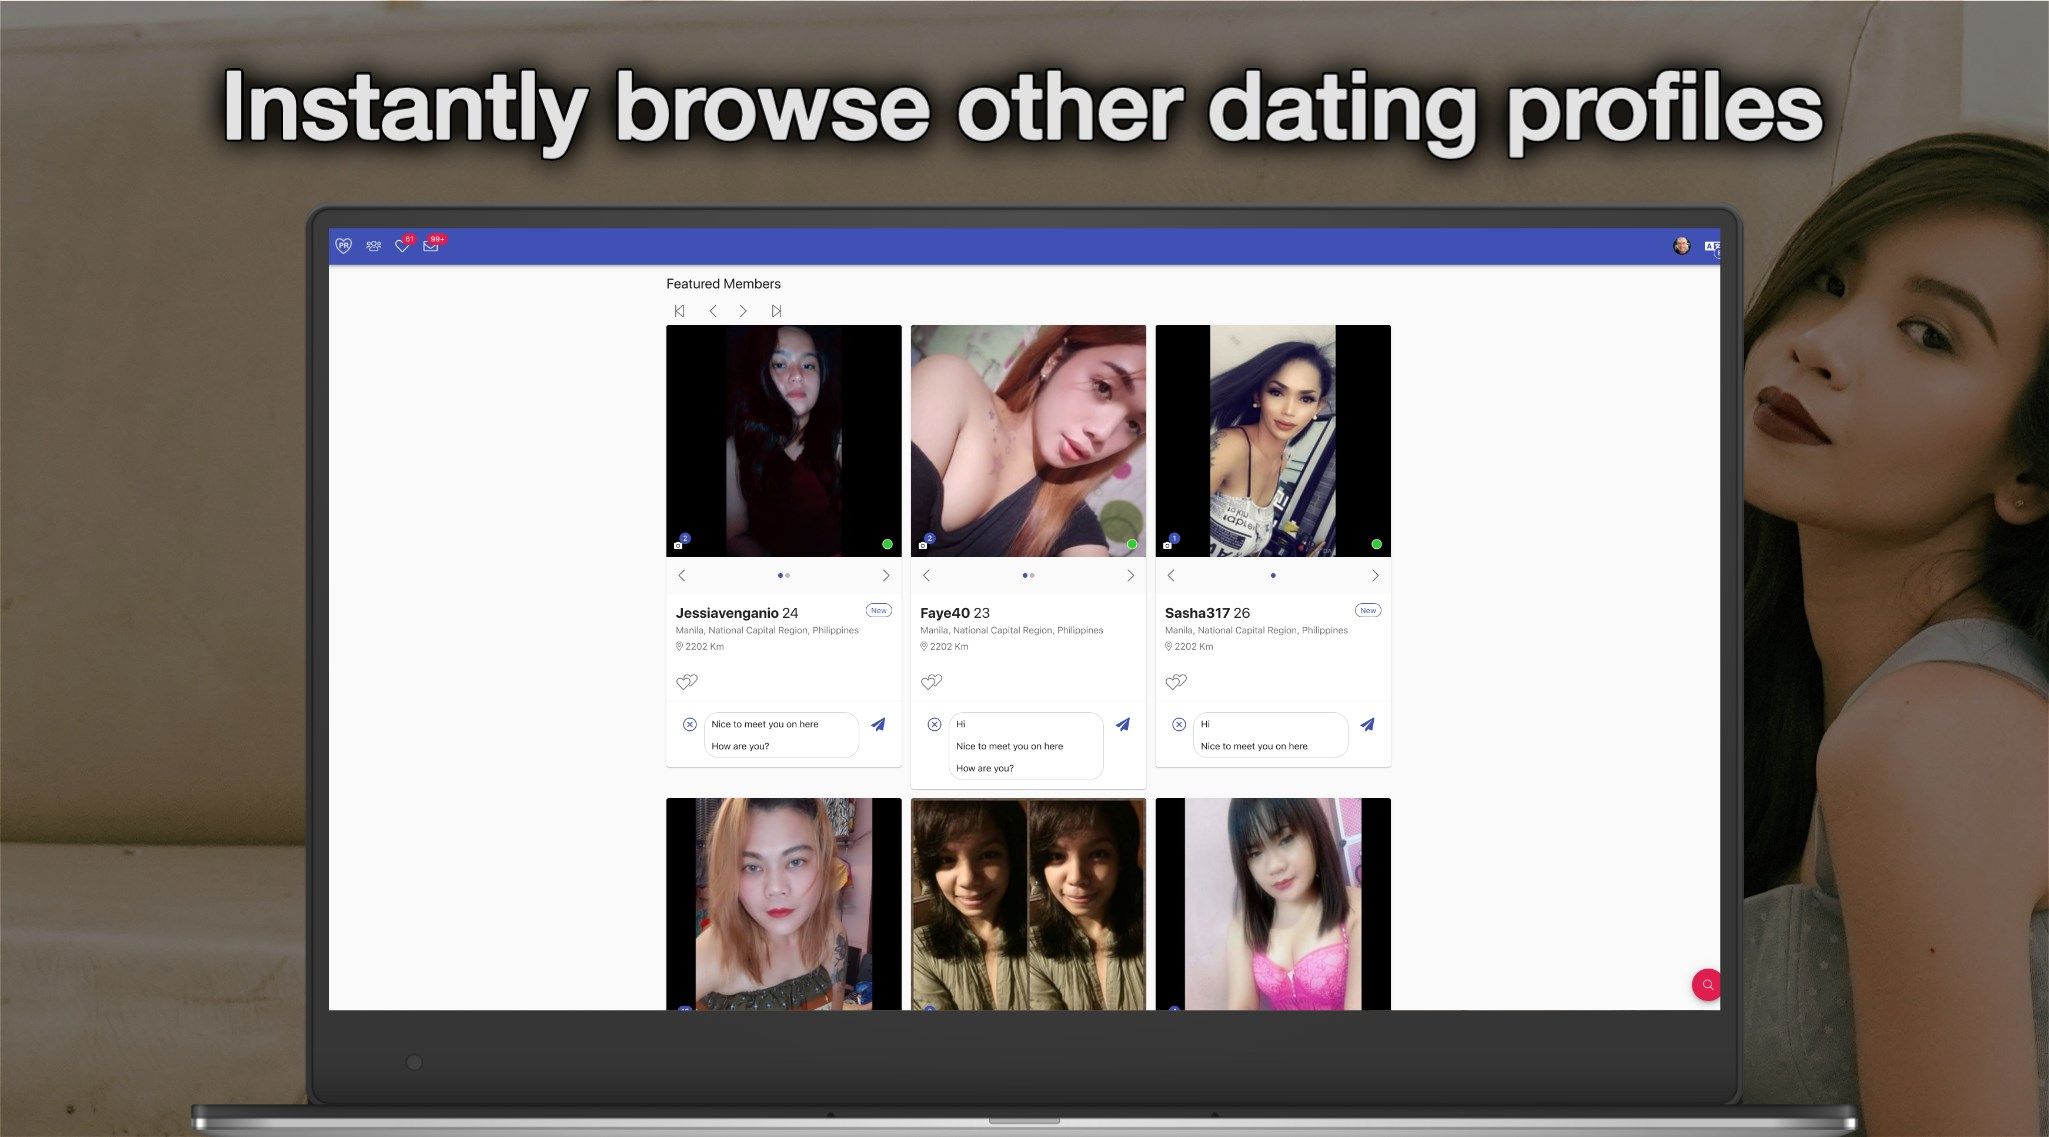 Join and instantly browse other user dating profiles